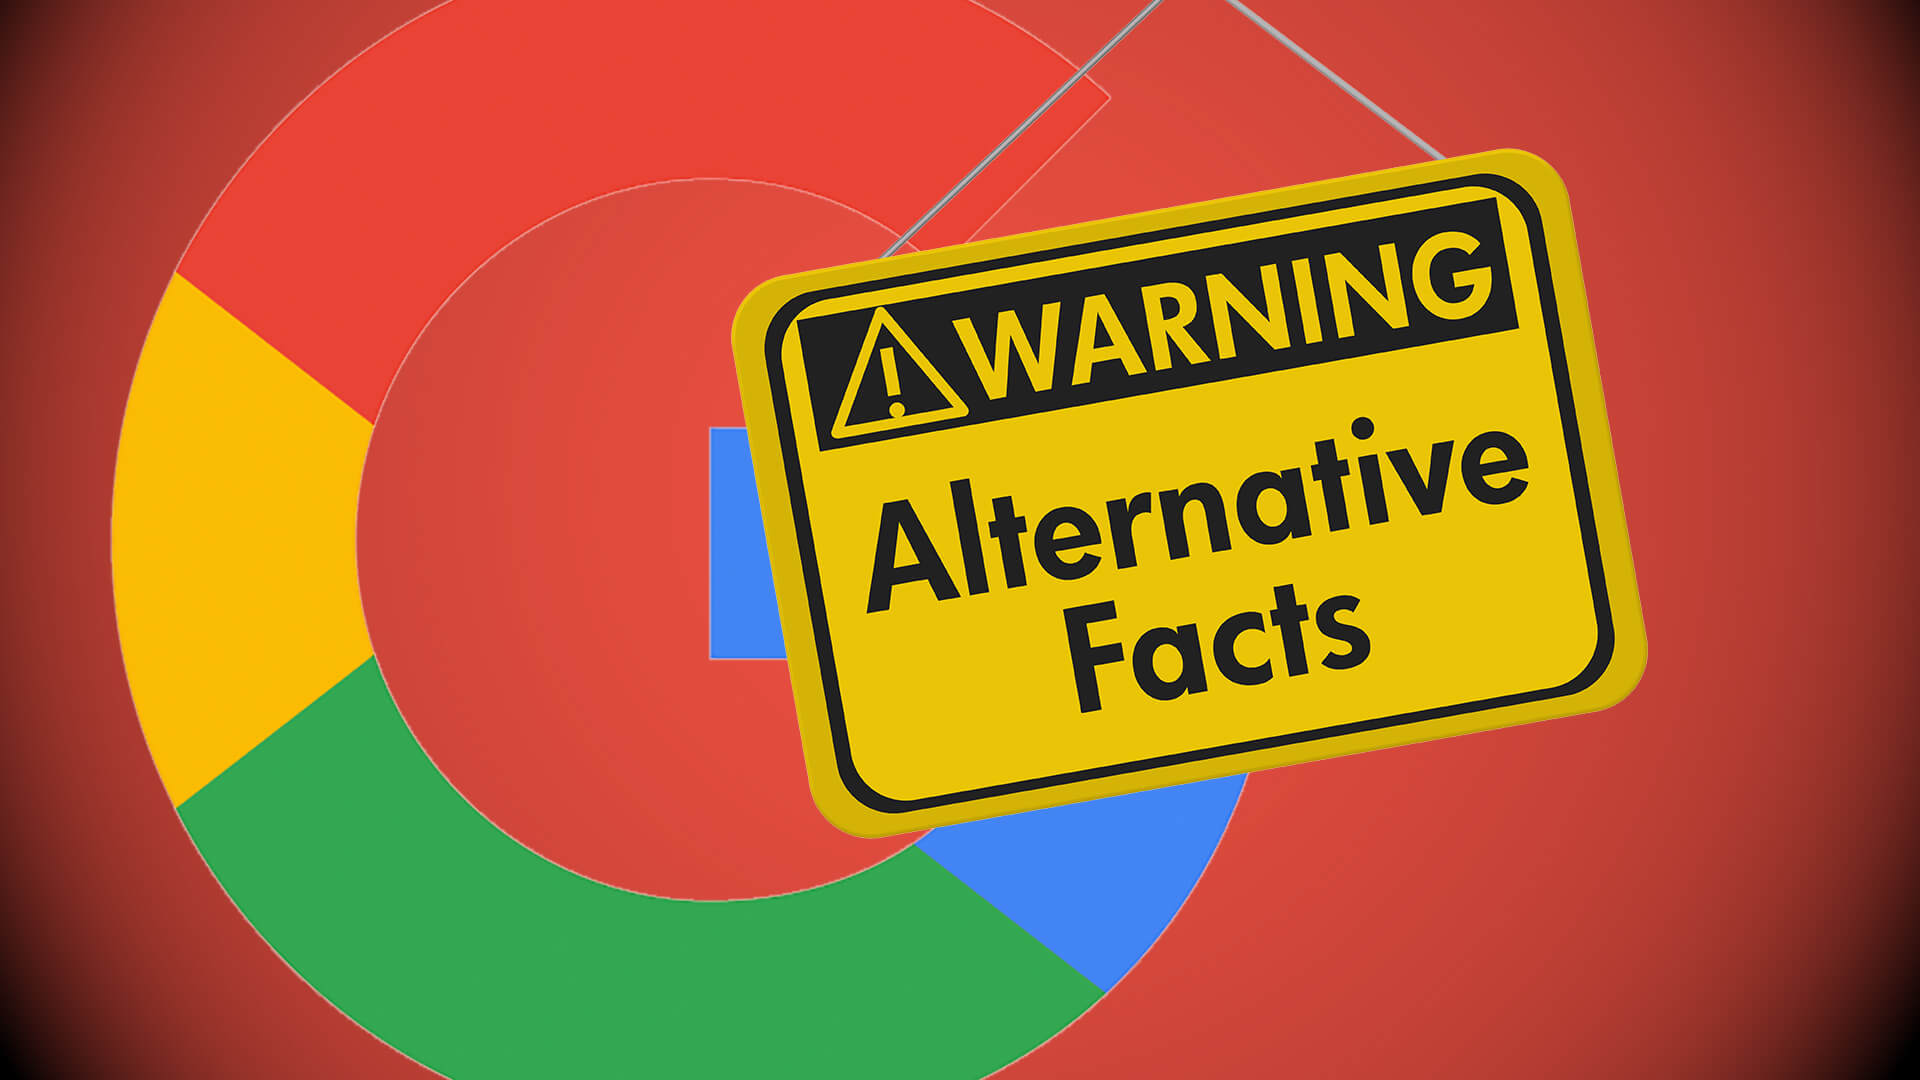 Google serves 48% of all ad traffic on “fake” news sites according to a new study from researchers Lia Bozarth and Ceren Budak at the University o